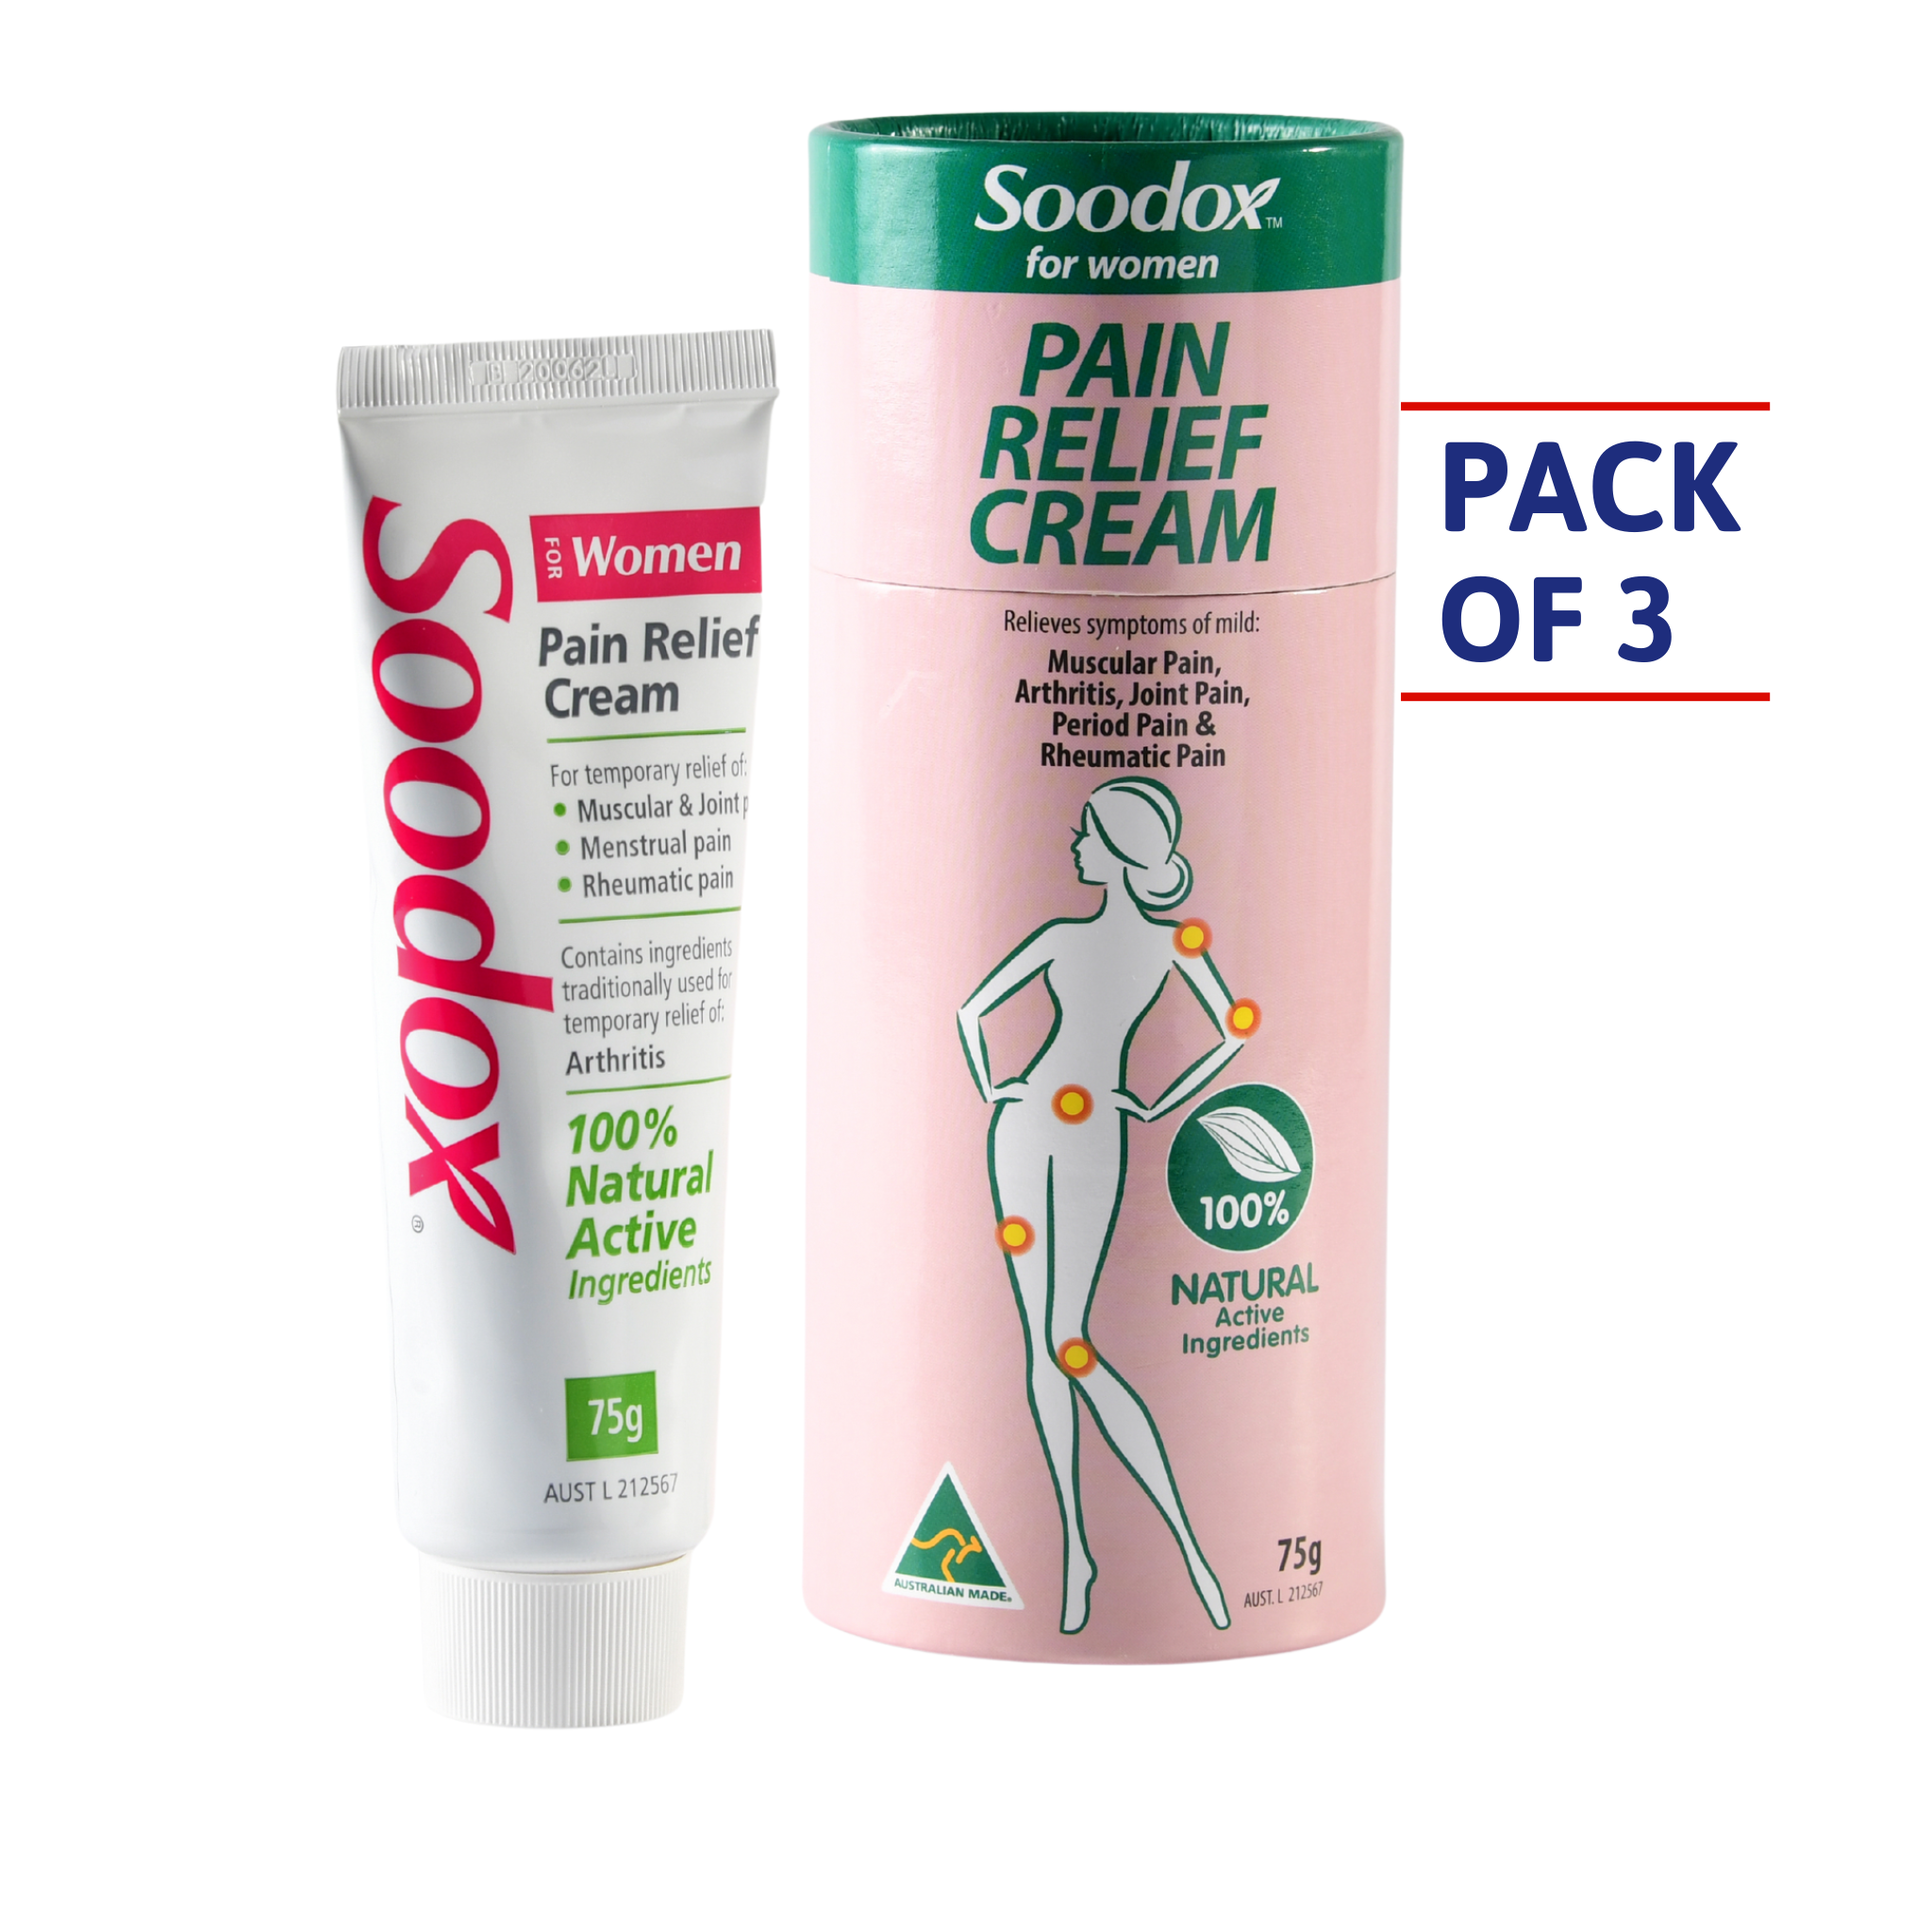 Soodox for Women pain relief cream pack of 3